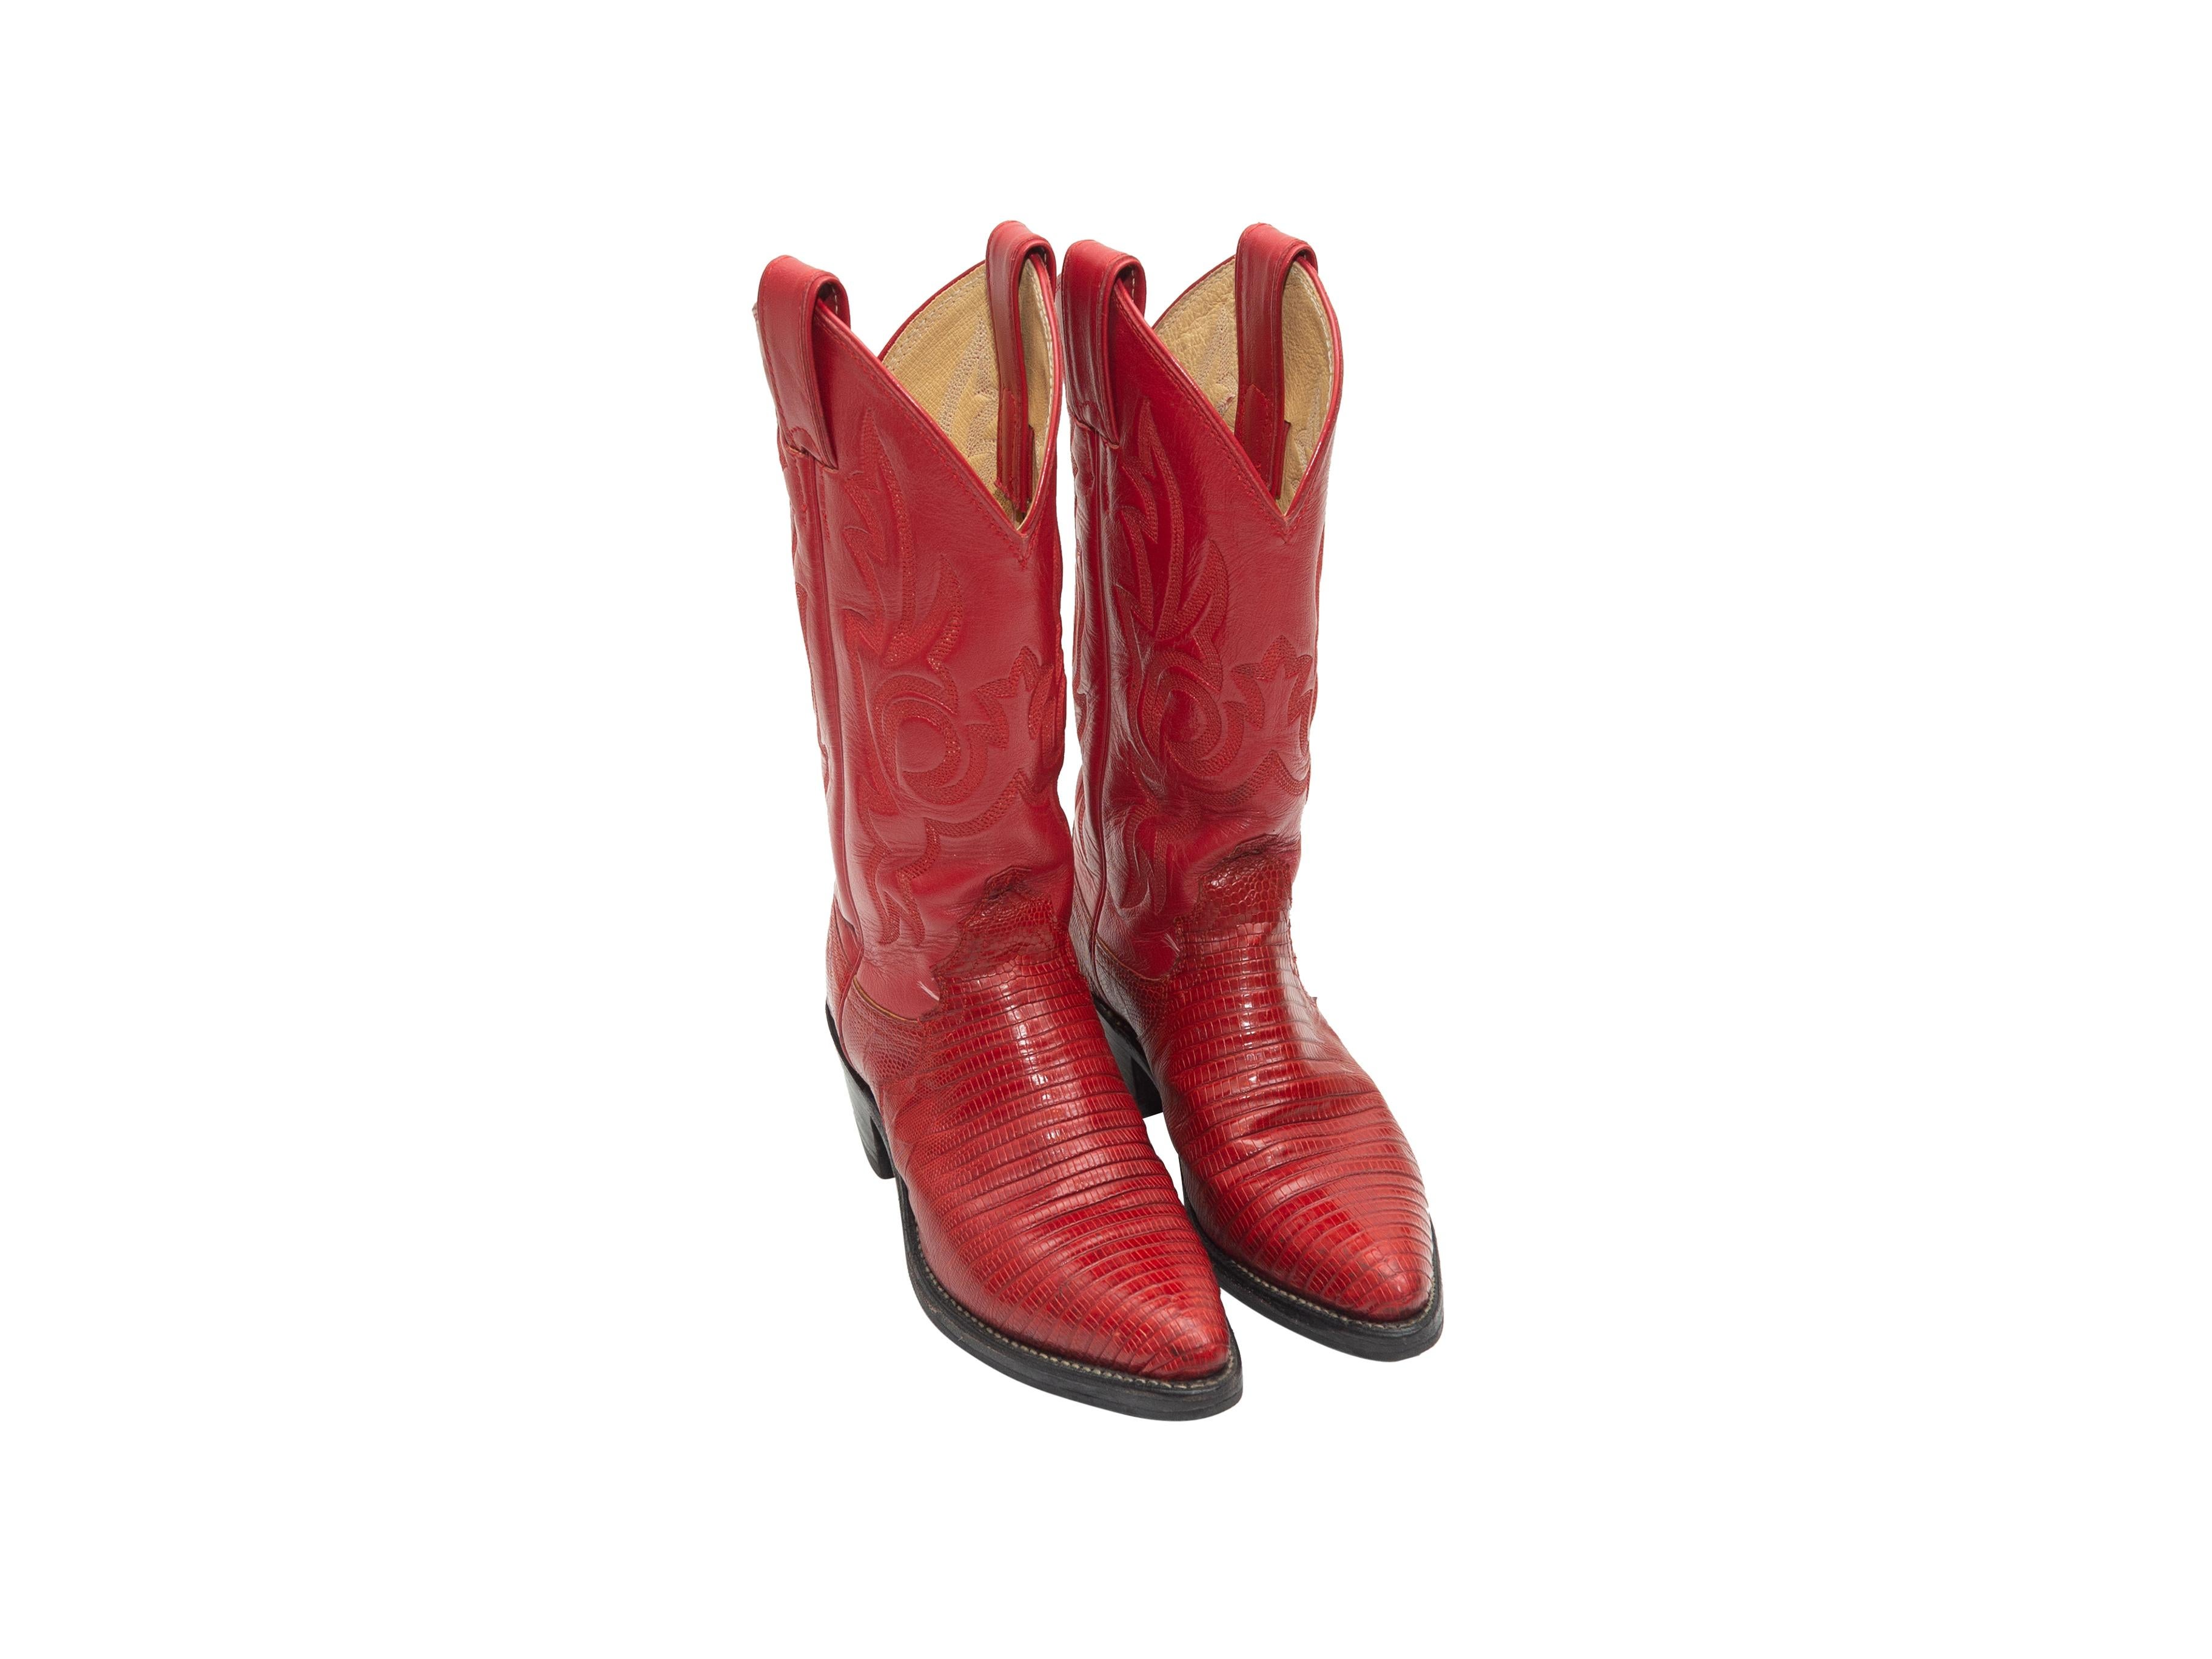 Product details: Vintage red leather cowboy boots by Justin. Stacked heels. 1.75